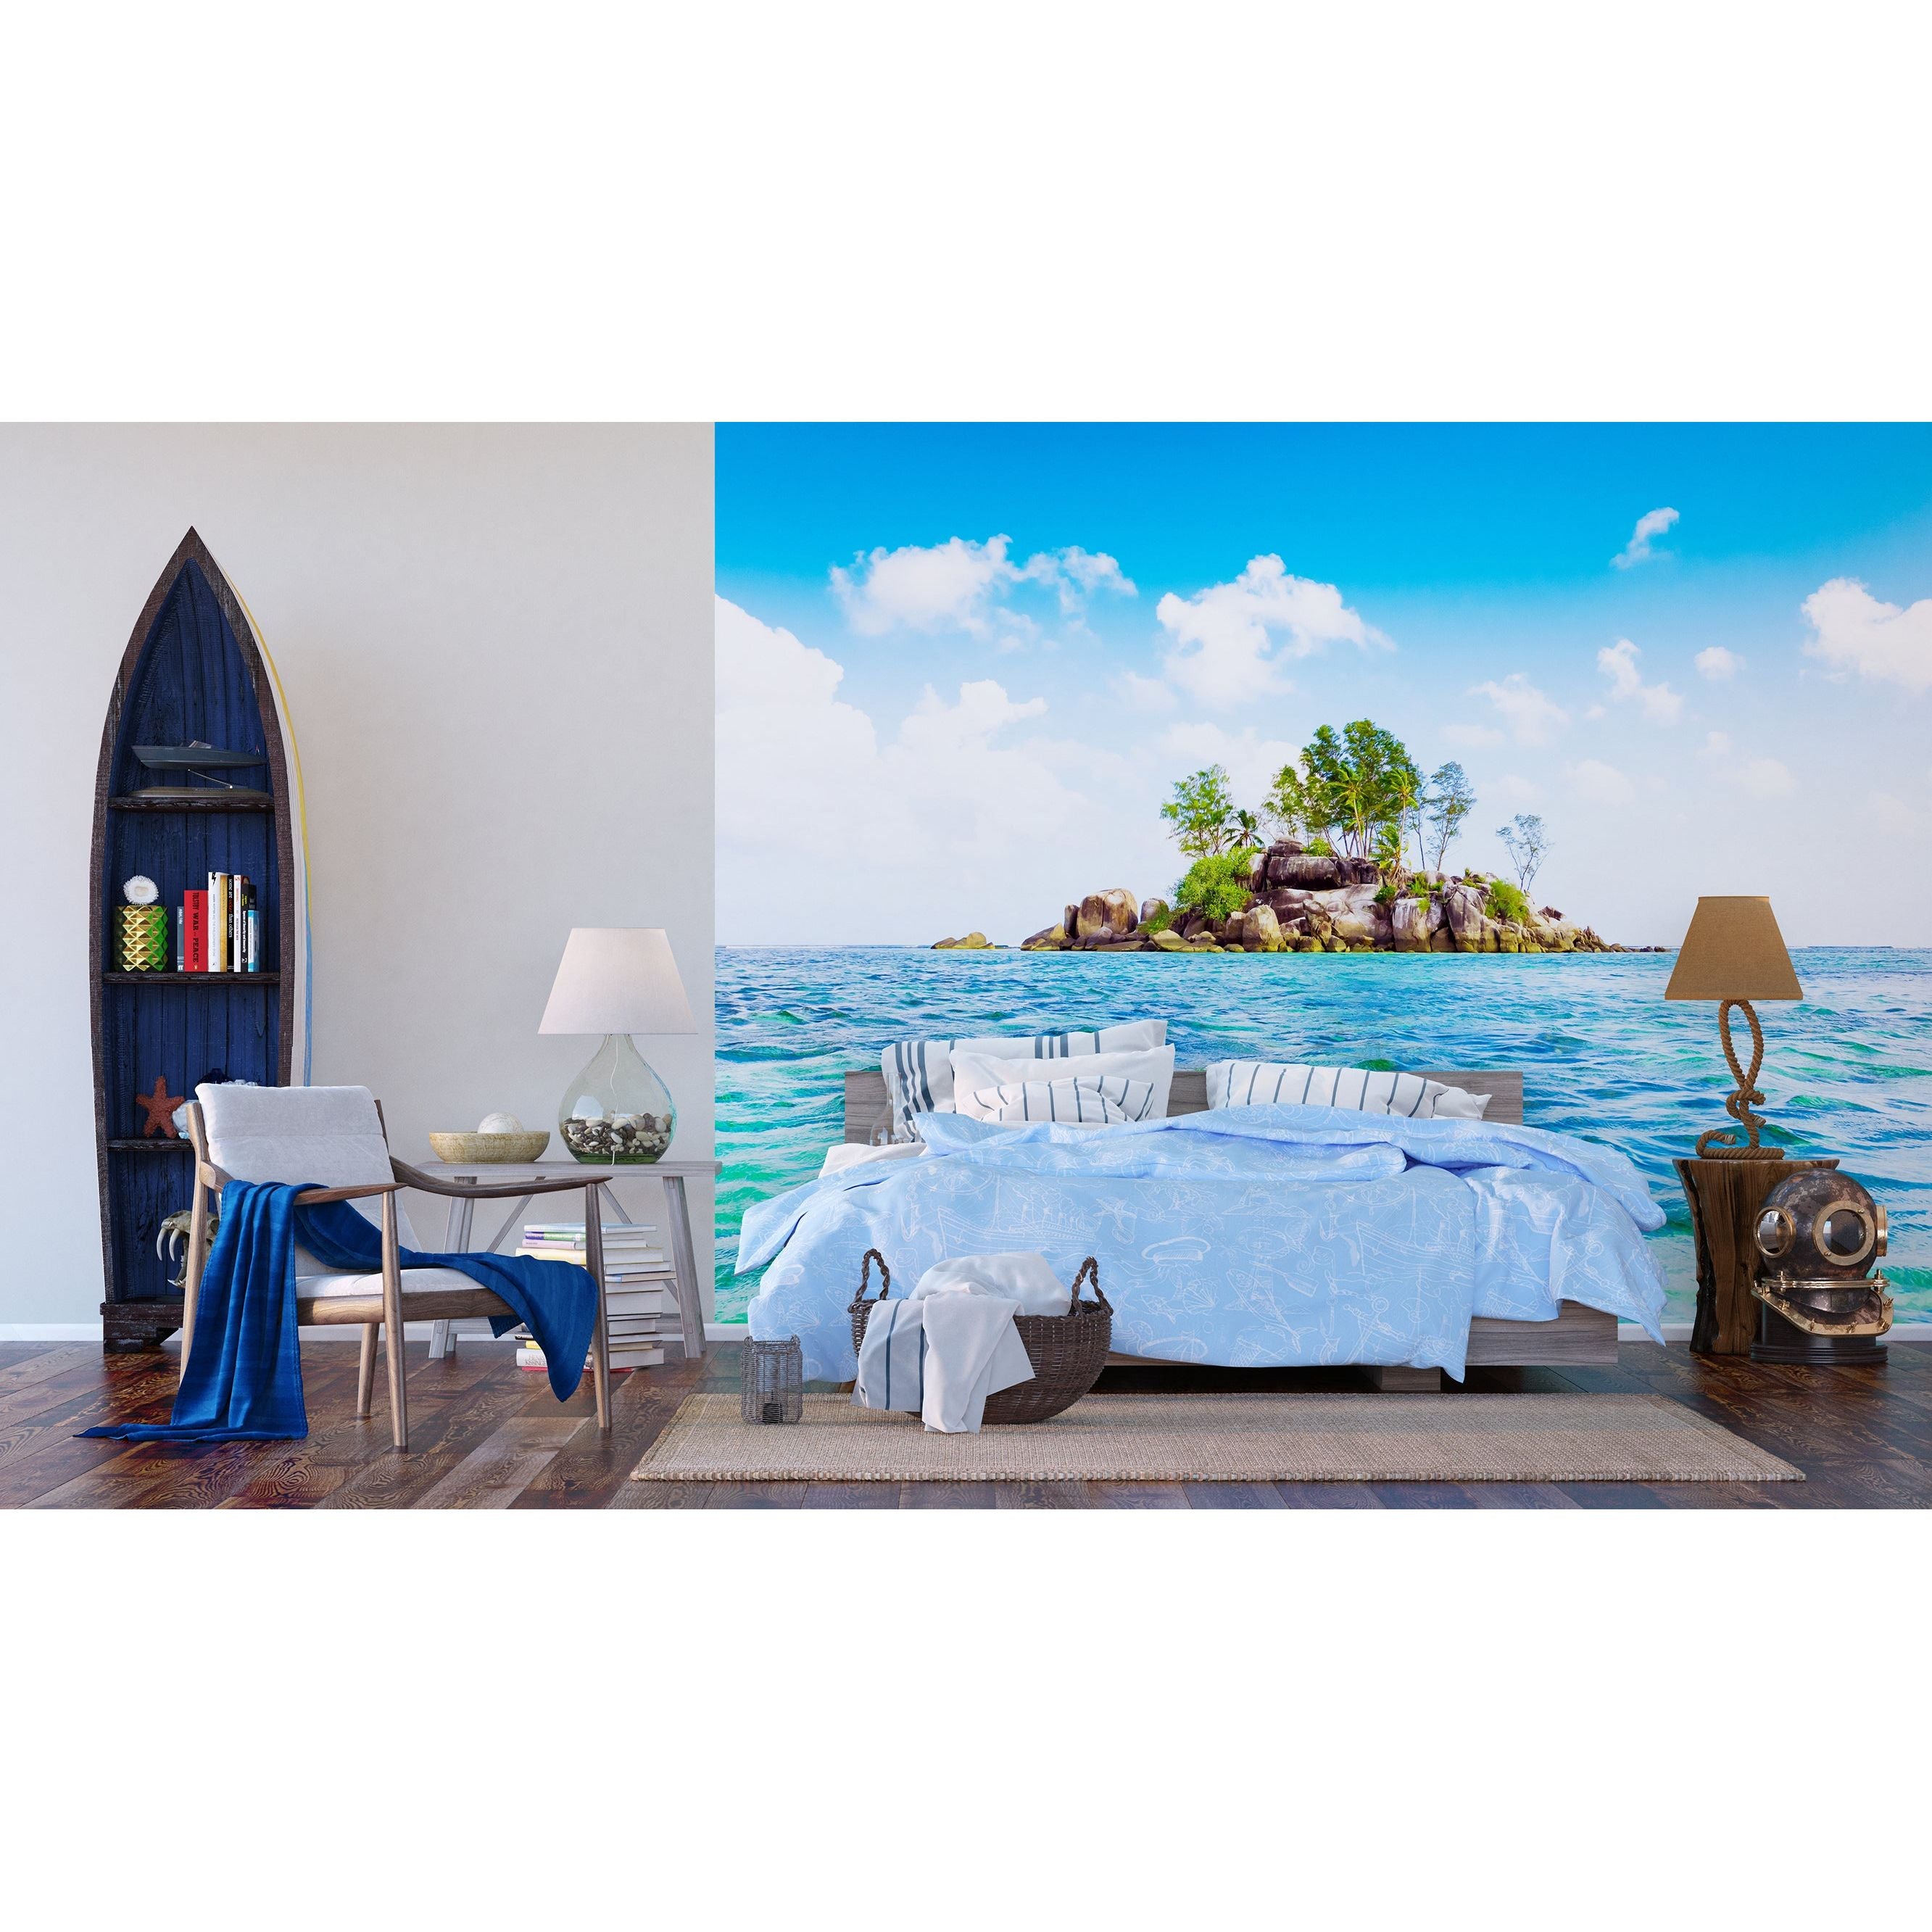 Isle of Serenity: A Secluded Tropical Paradise Wall Mural